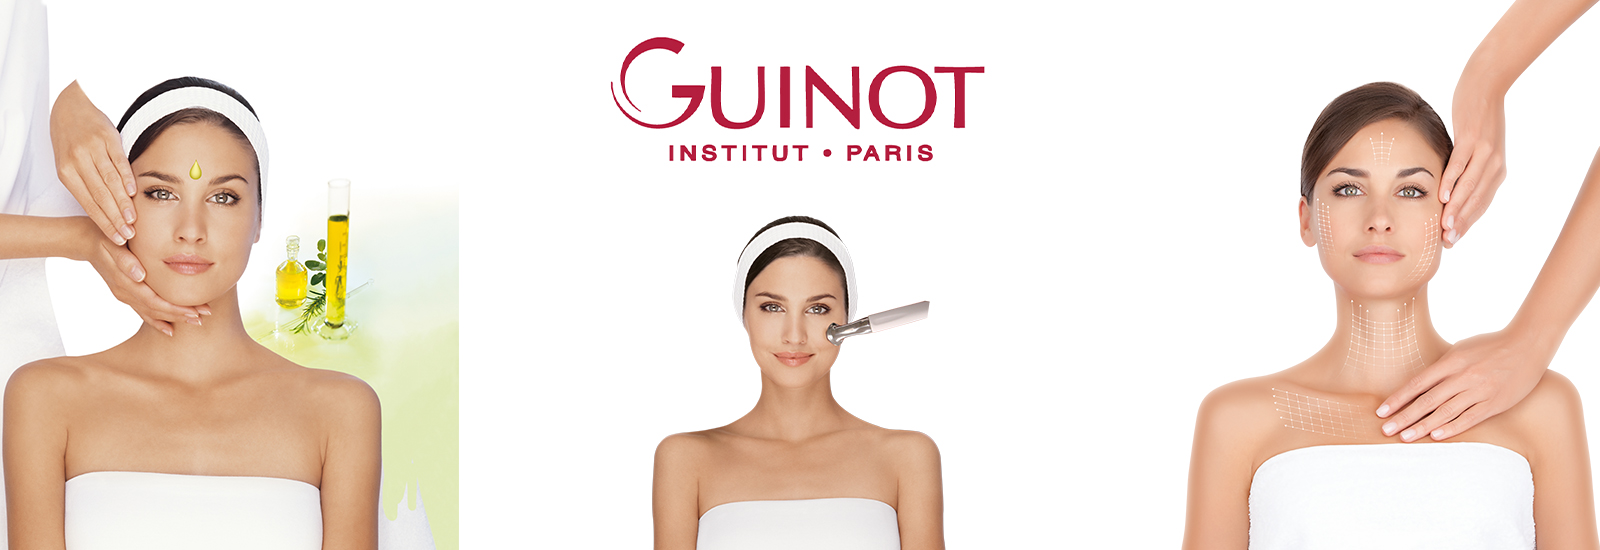 Guinot Facial Treatments In Chiswick, London, Chiswick Beautique